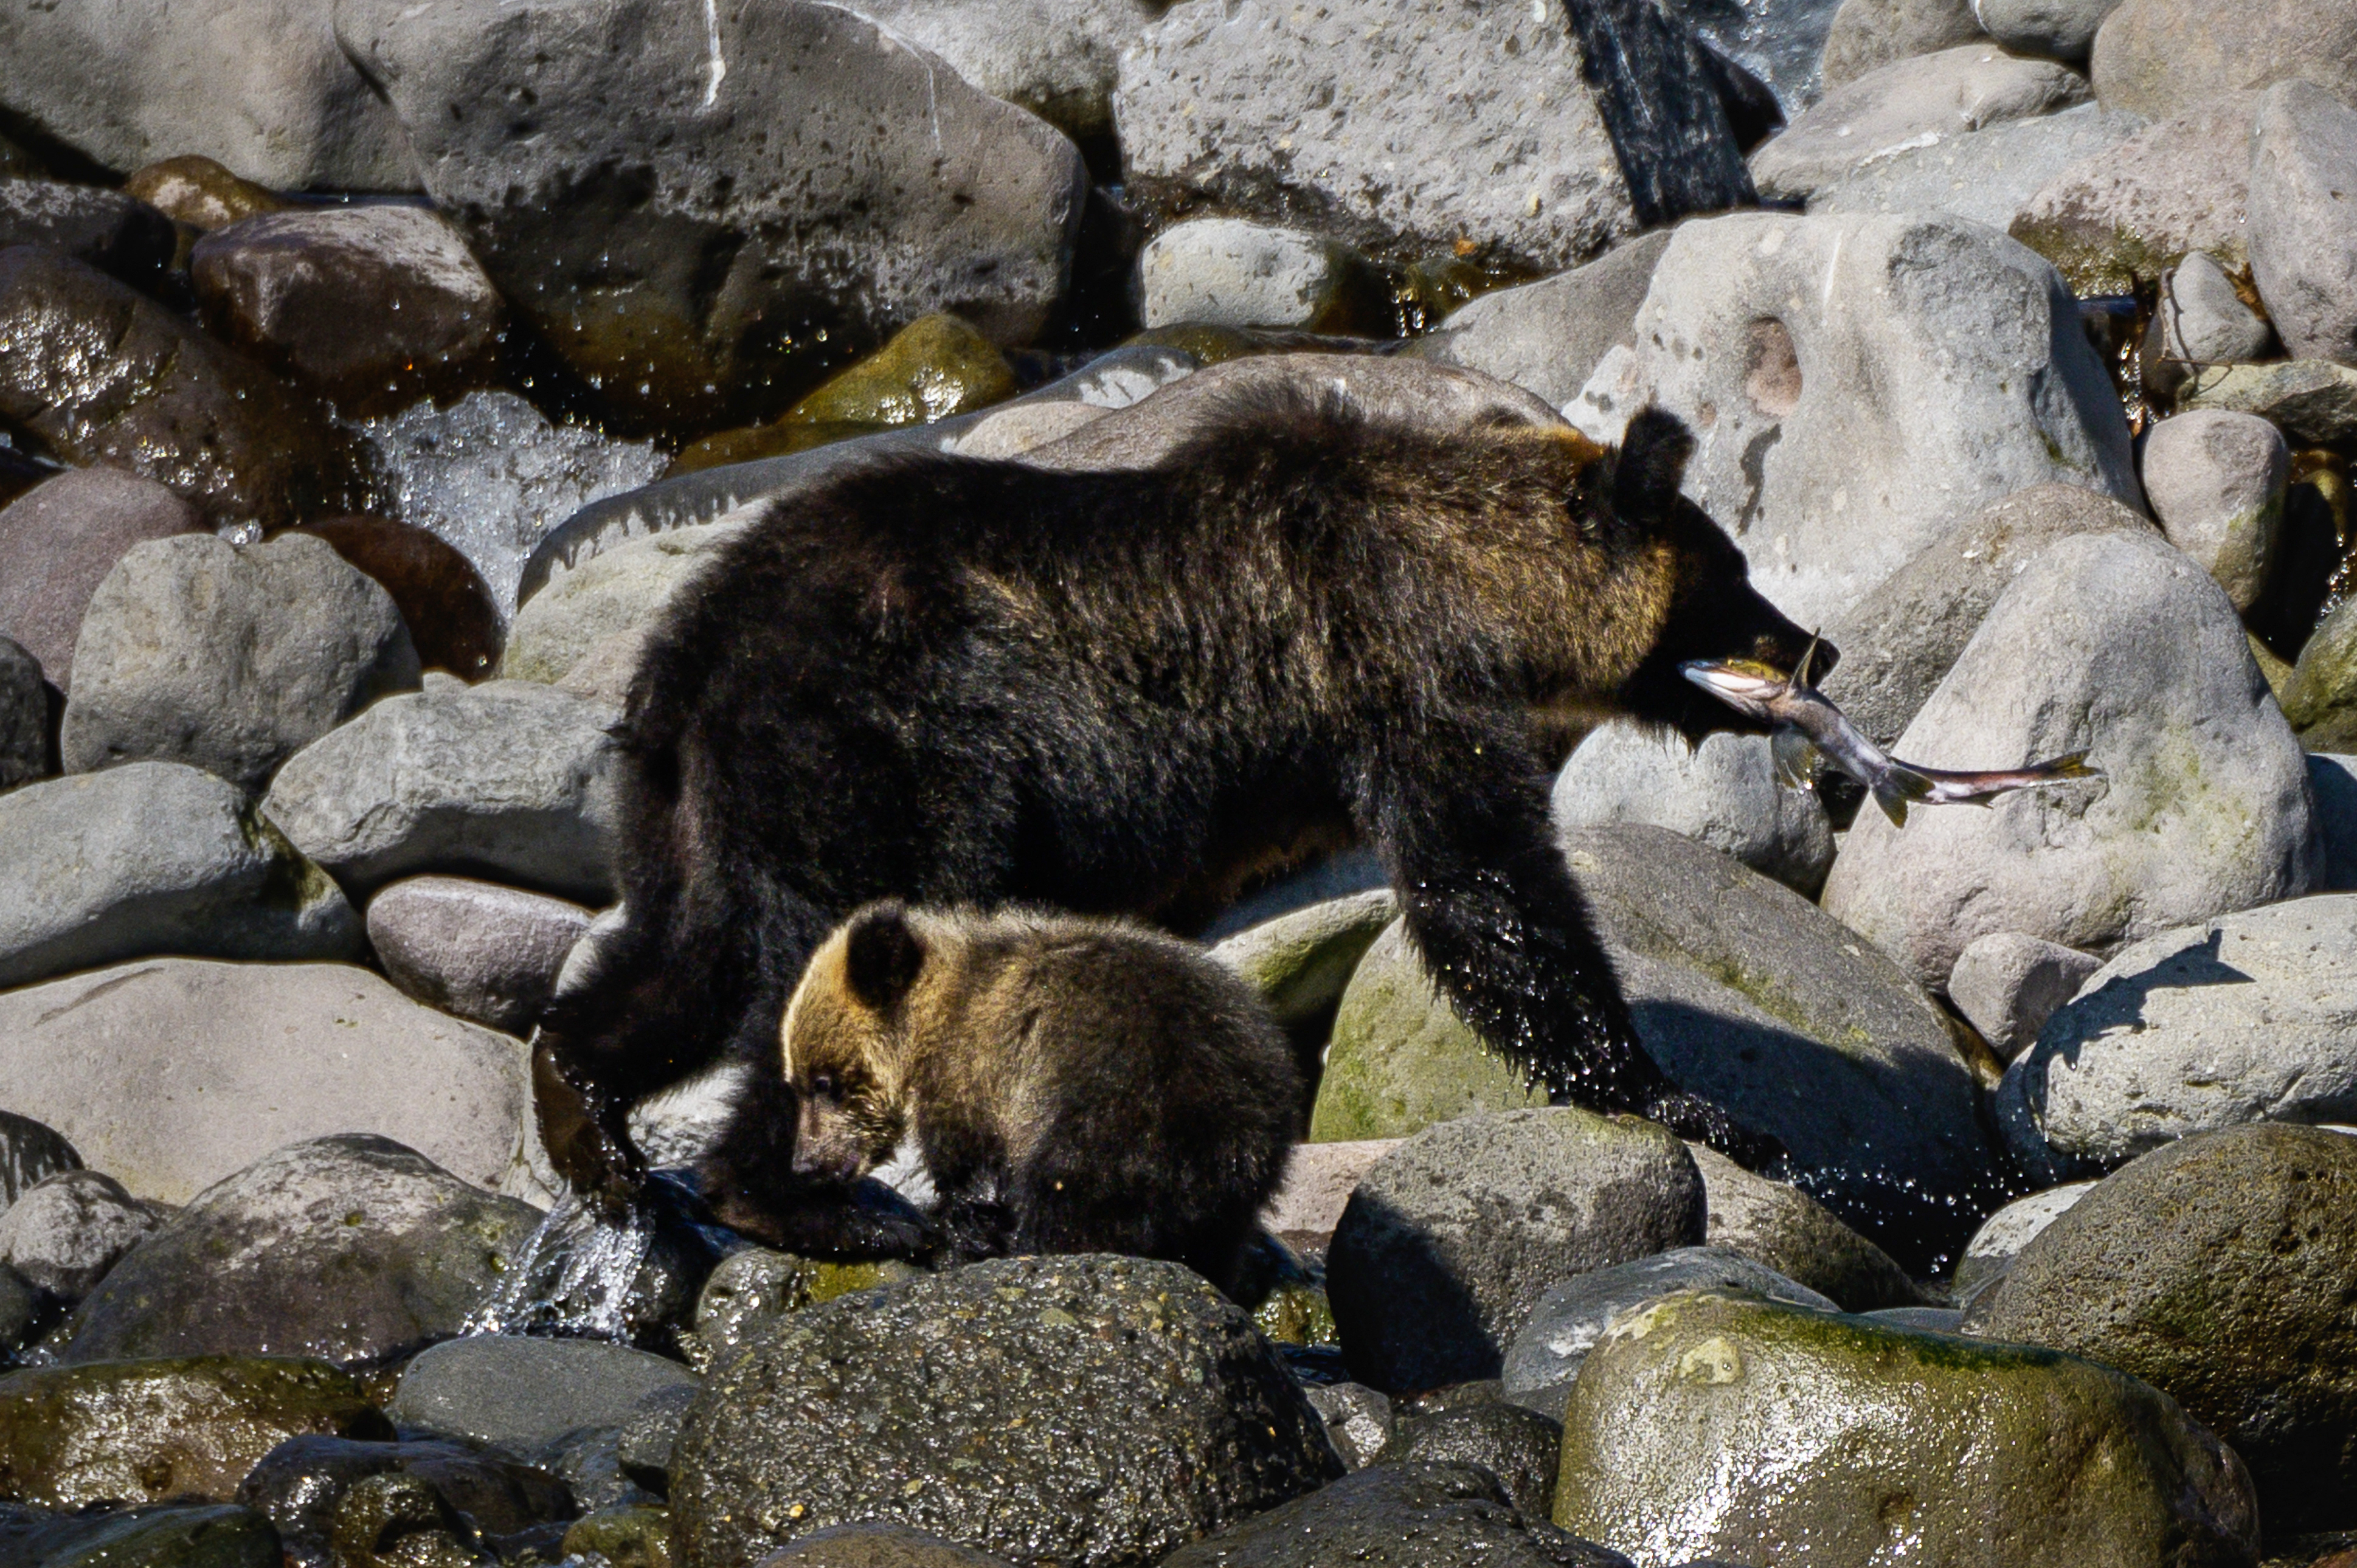 Japanese Angler Missing, Bear Found with Waders In Mouth